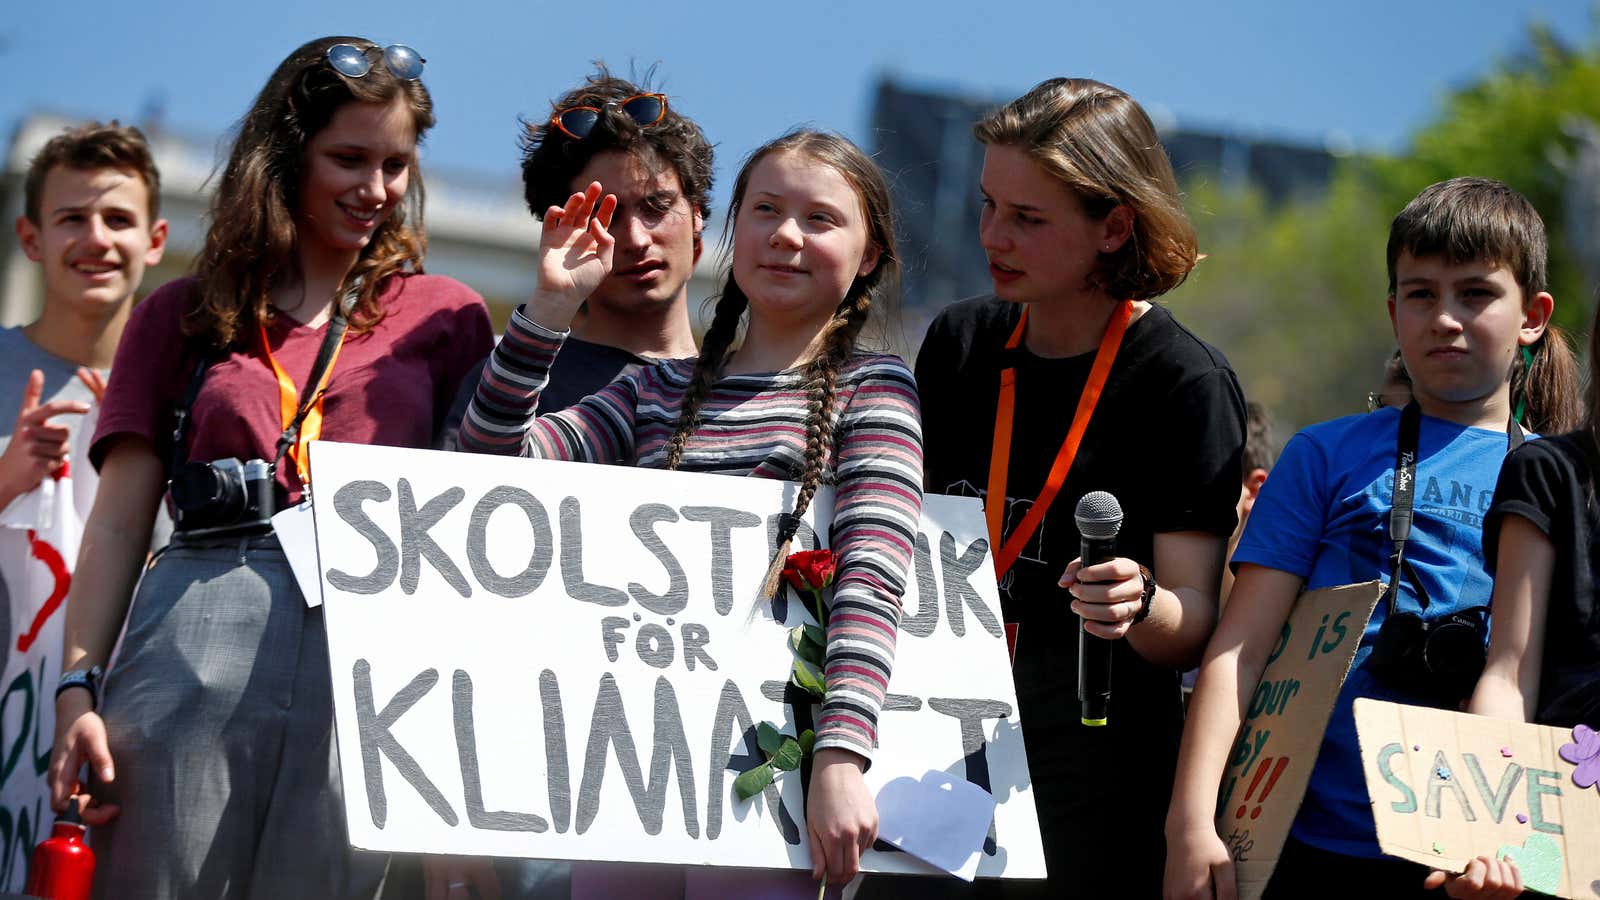 Climate activist Greta Thunberg: “They ask me, ‘What should I do?’ And I say: ‘Act. Do something.&#39;”